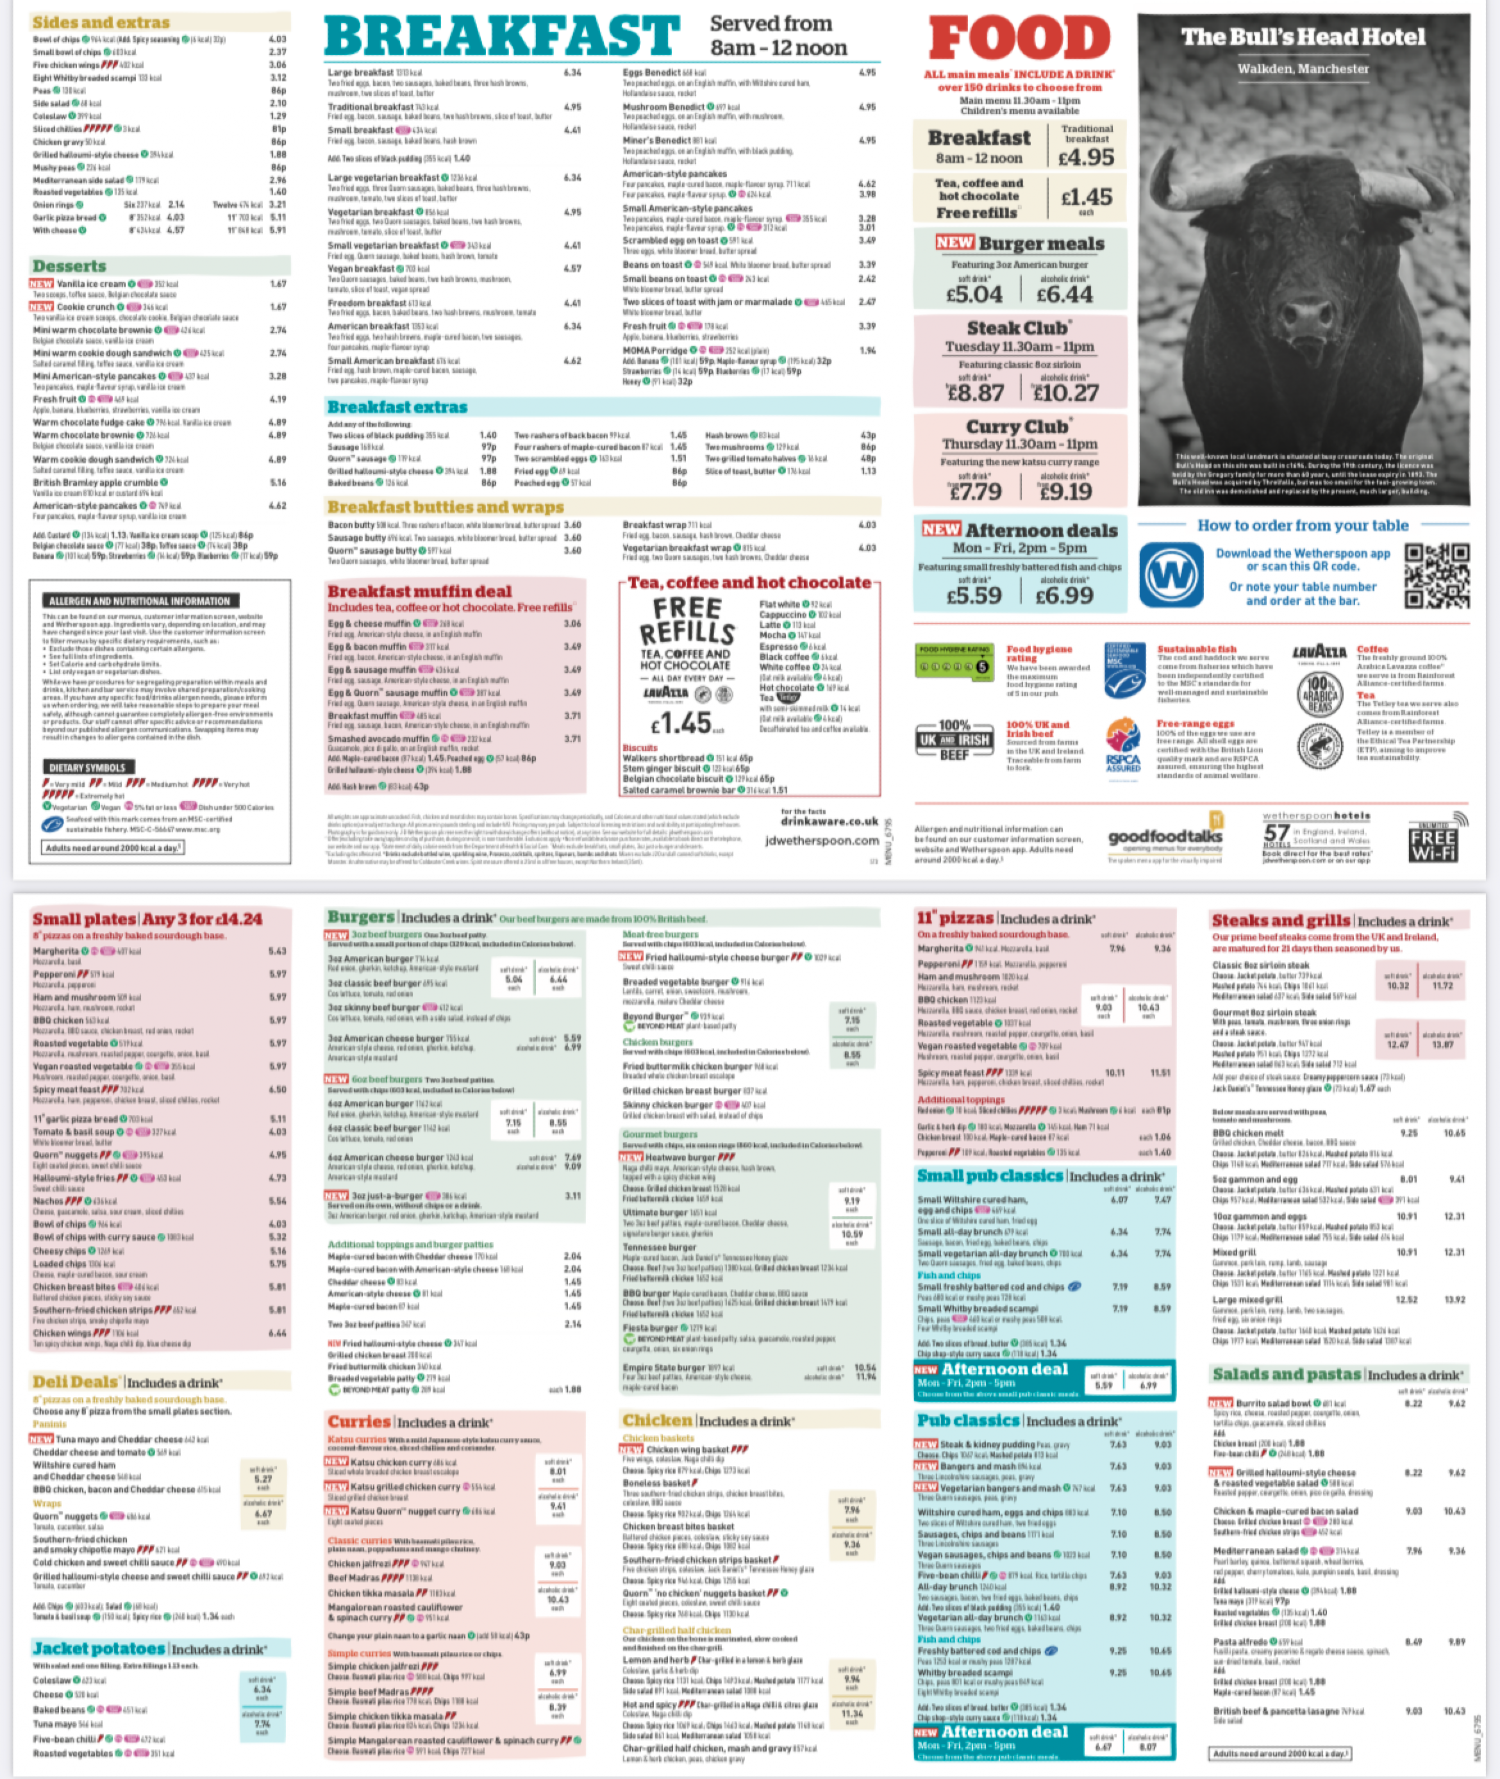 Takeaway Restaurant Menu Page - Wetherspoons – The Bull’s Head Hotel - Manchester